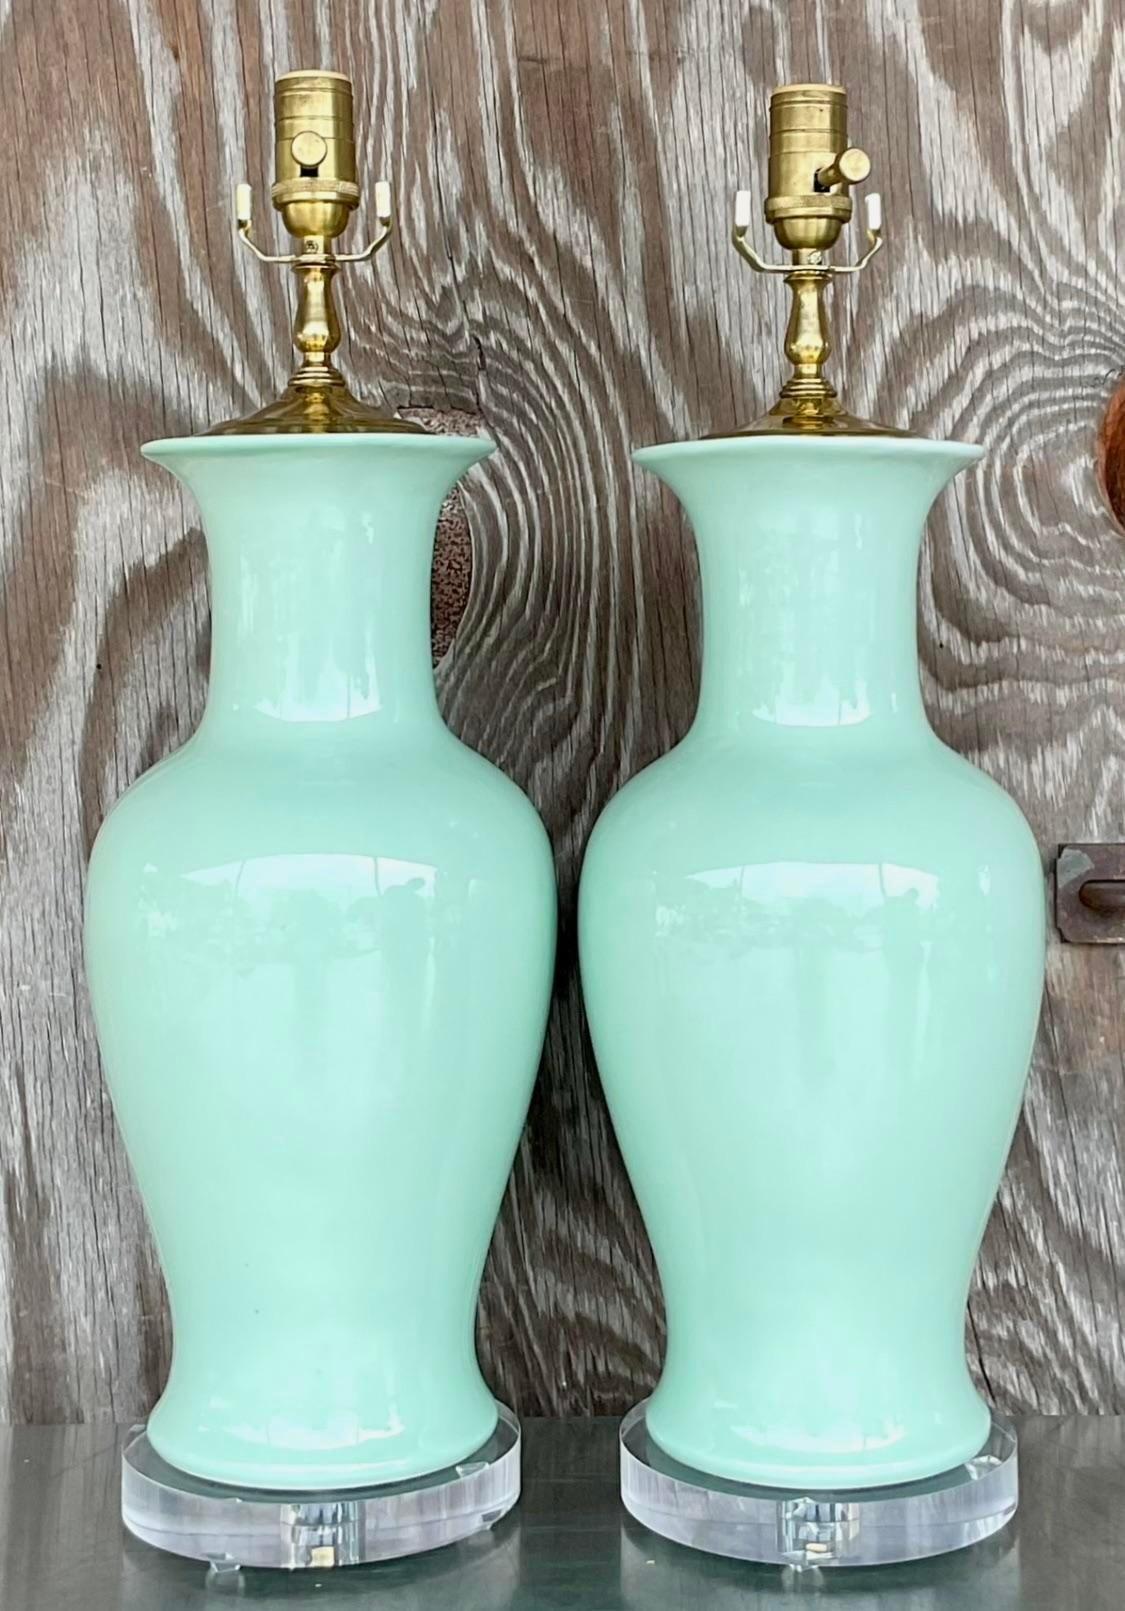 Late 20th Century Vintage Regency Glazed Ceramic Table Lamps - a Pair For Sale 1